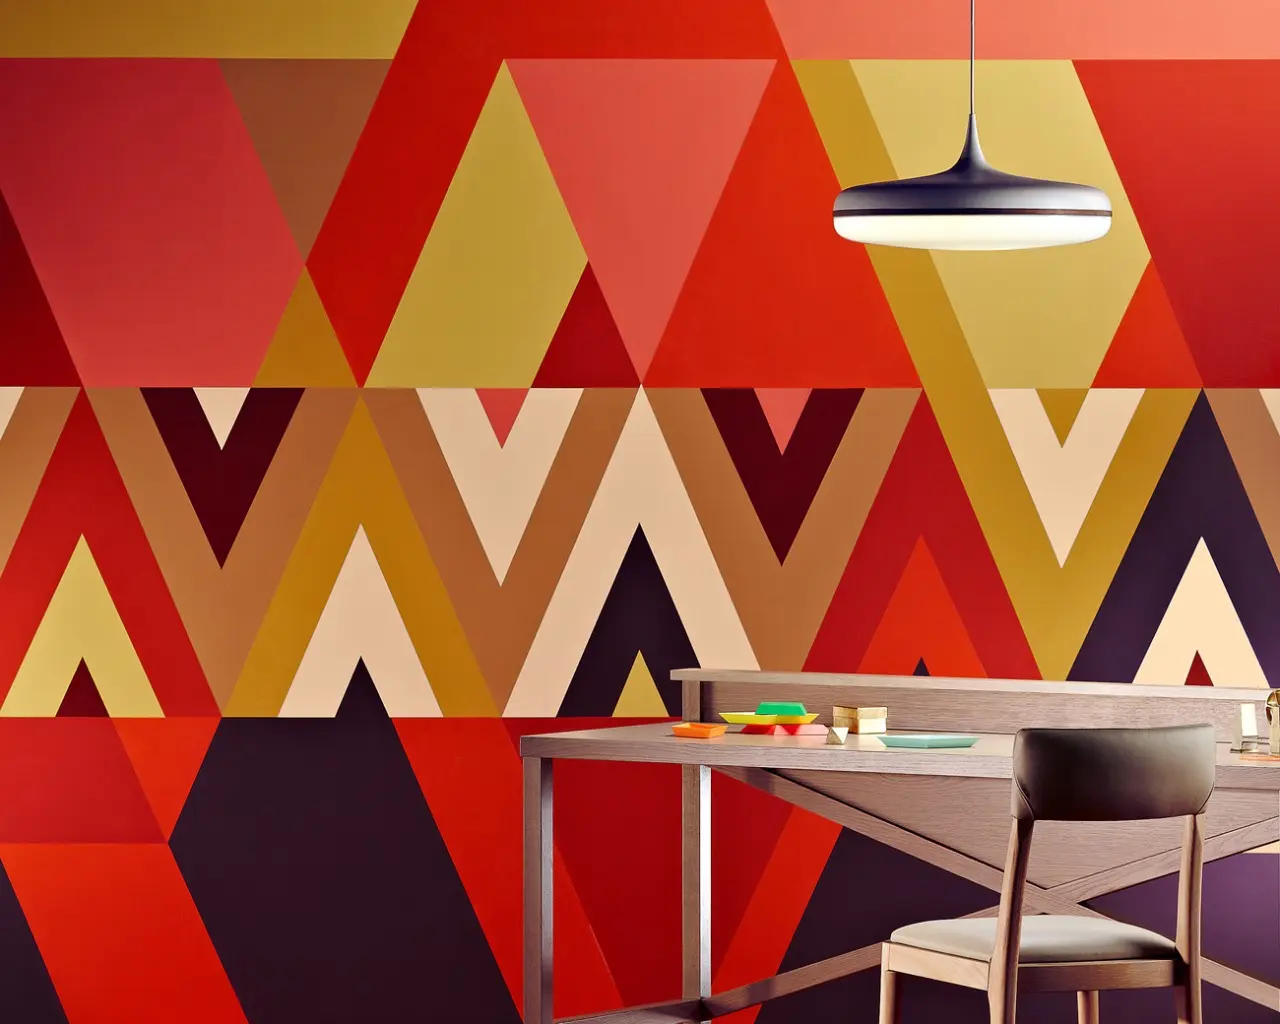 Triangular geometric wall with red, yellow and brown contrasts Dulux Wash&Wear® Tango, Hot Chillie, Crop Circle, Smoked Amethyst, Curd, Mid Tan, Red Clown, Tangerine Bliss, and Bunging Brier.